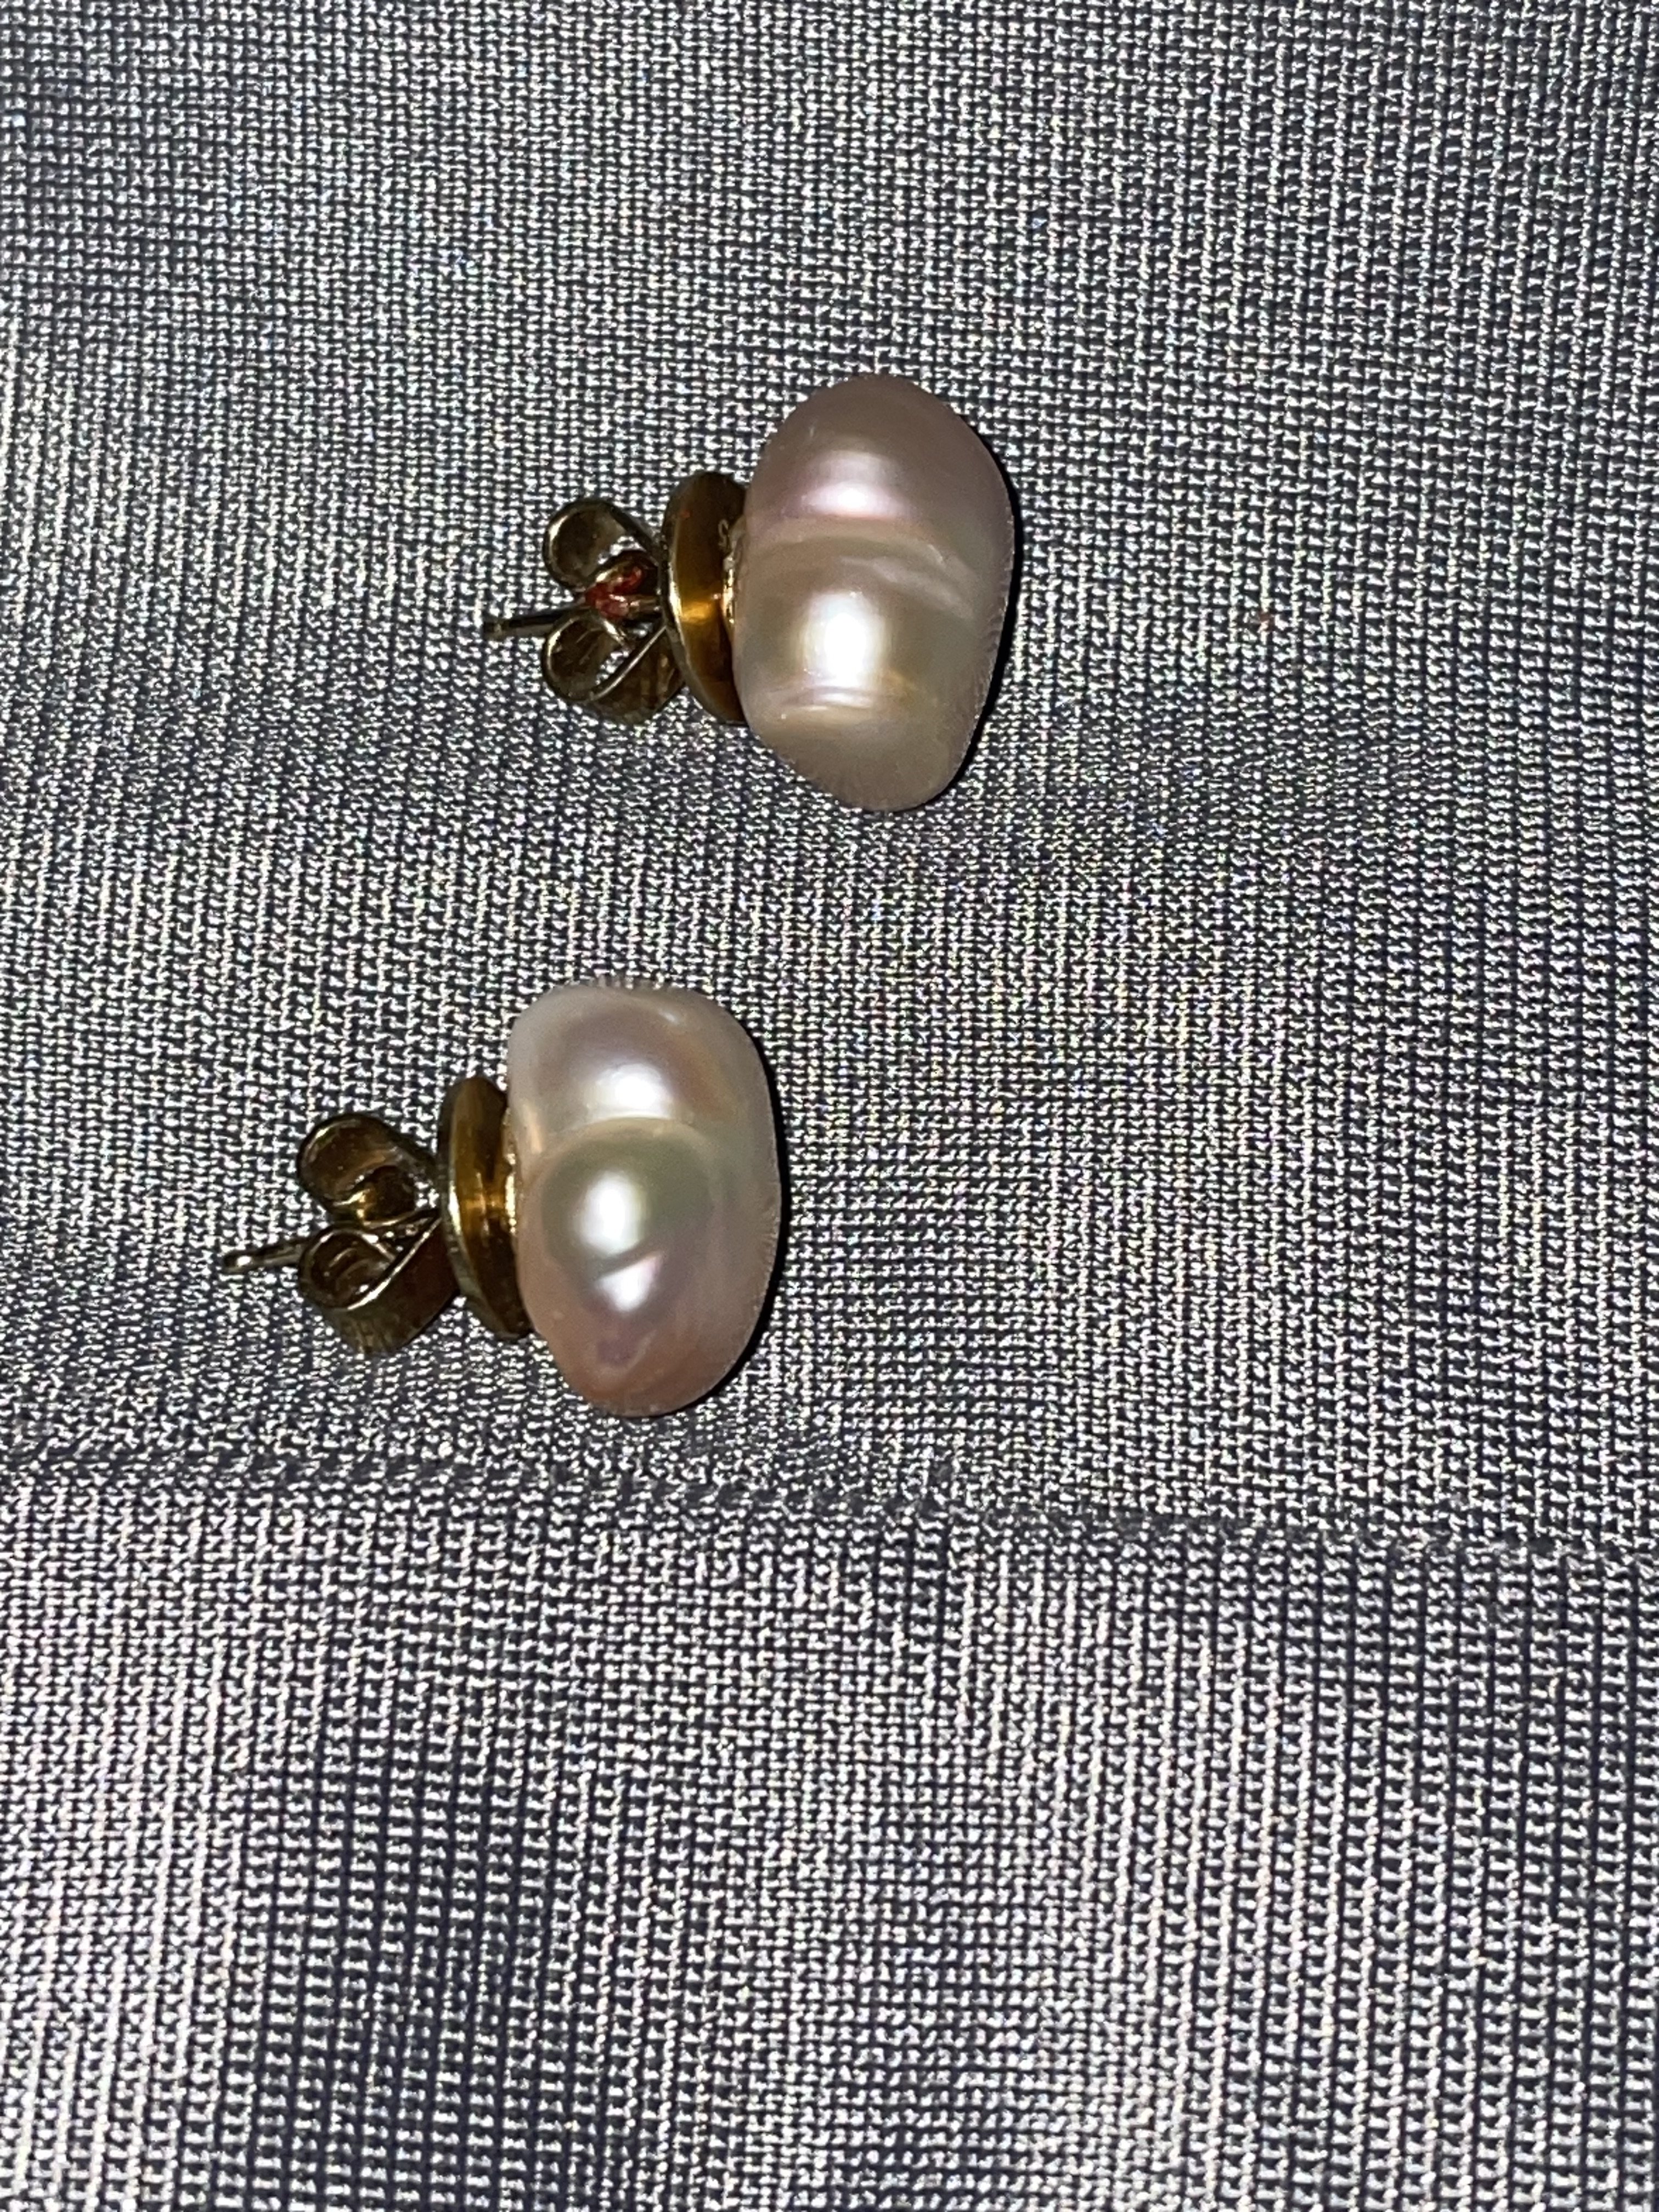 What type of pearls are these?